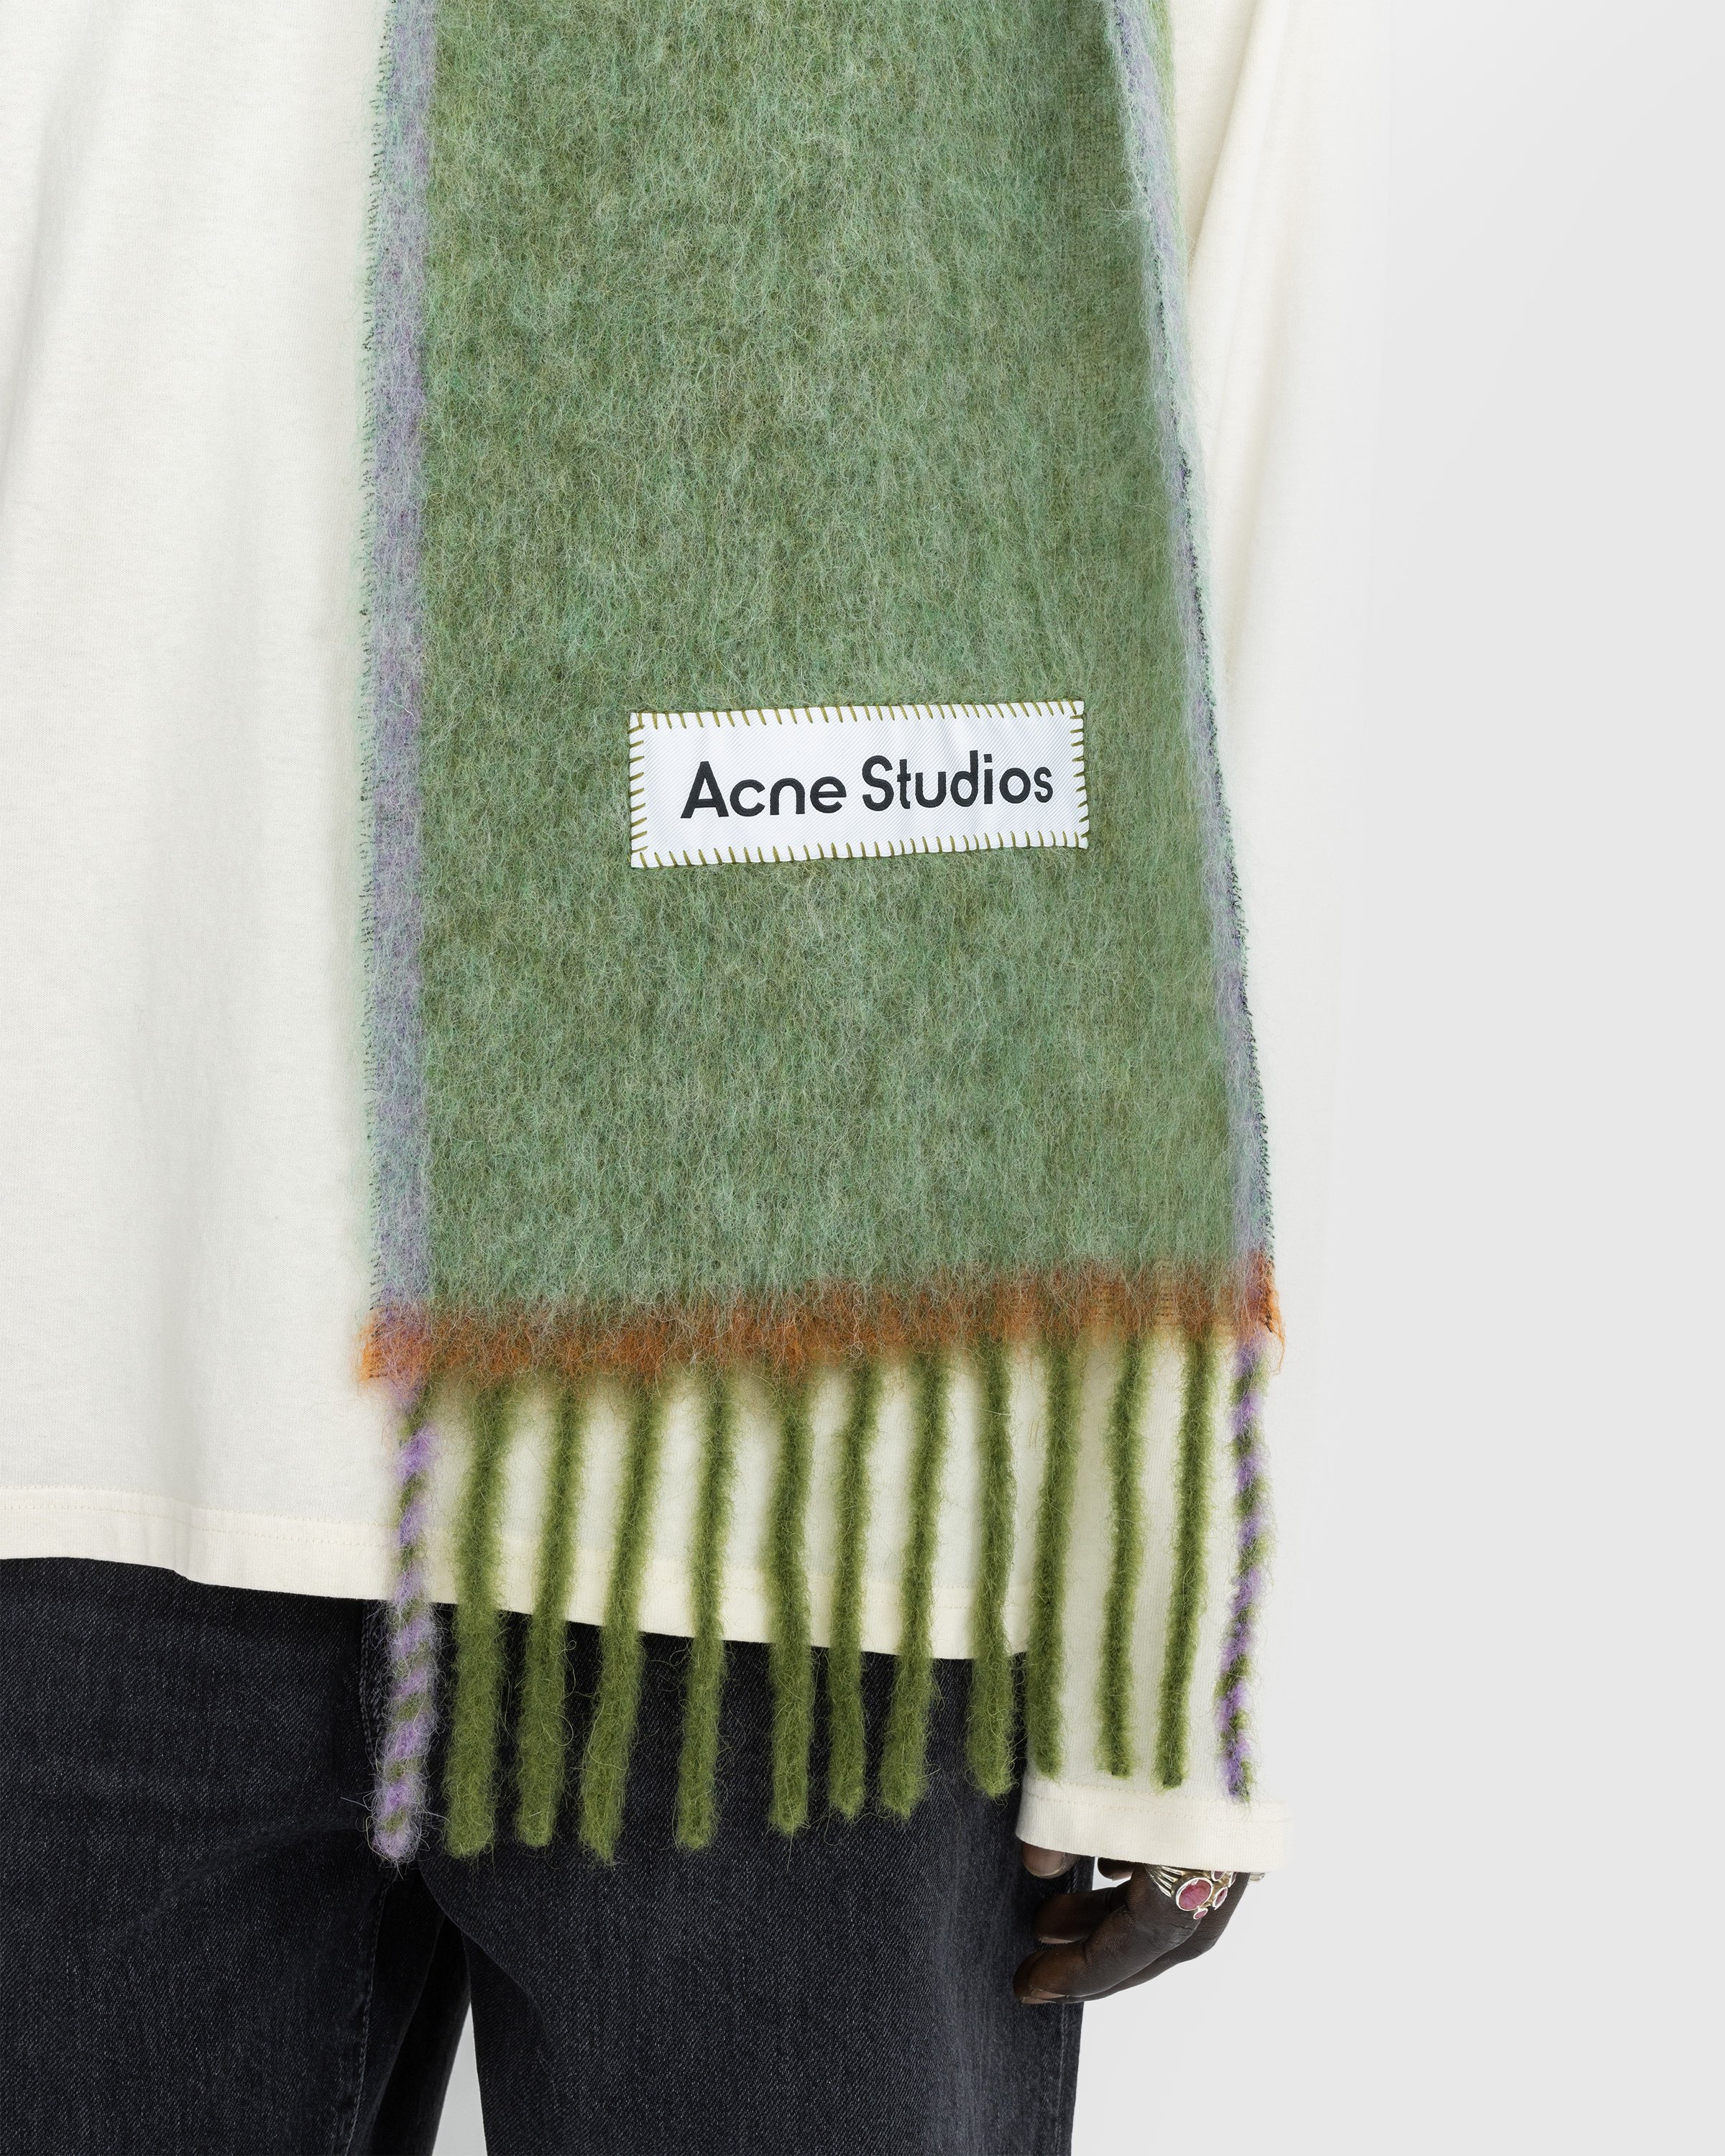 Acne Studios - Wool Mohair Scarf Grass Green - Accessories - Green - Image 6